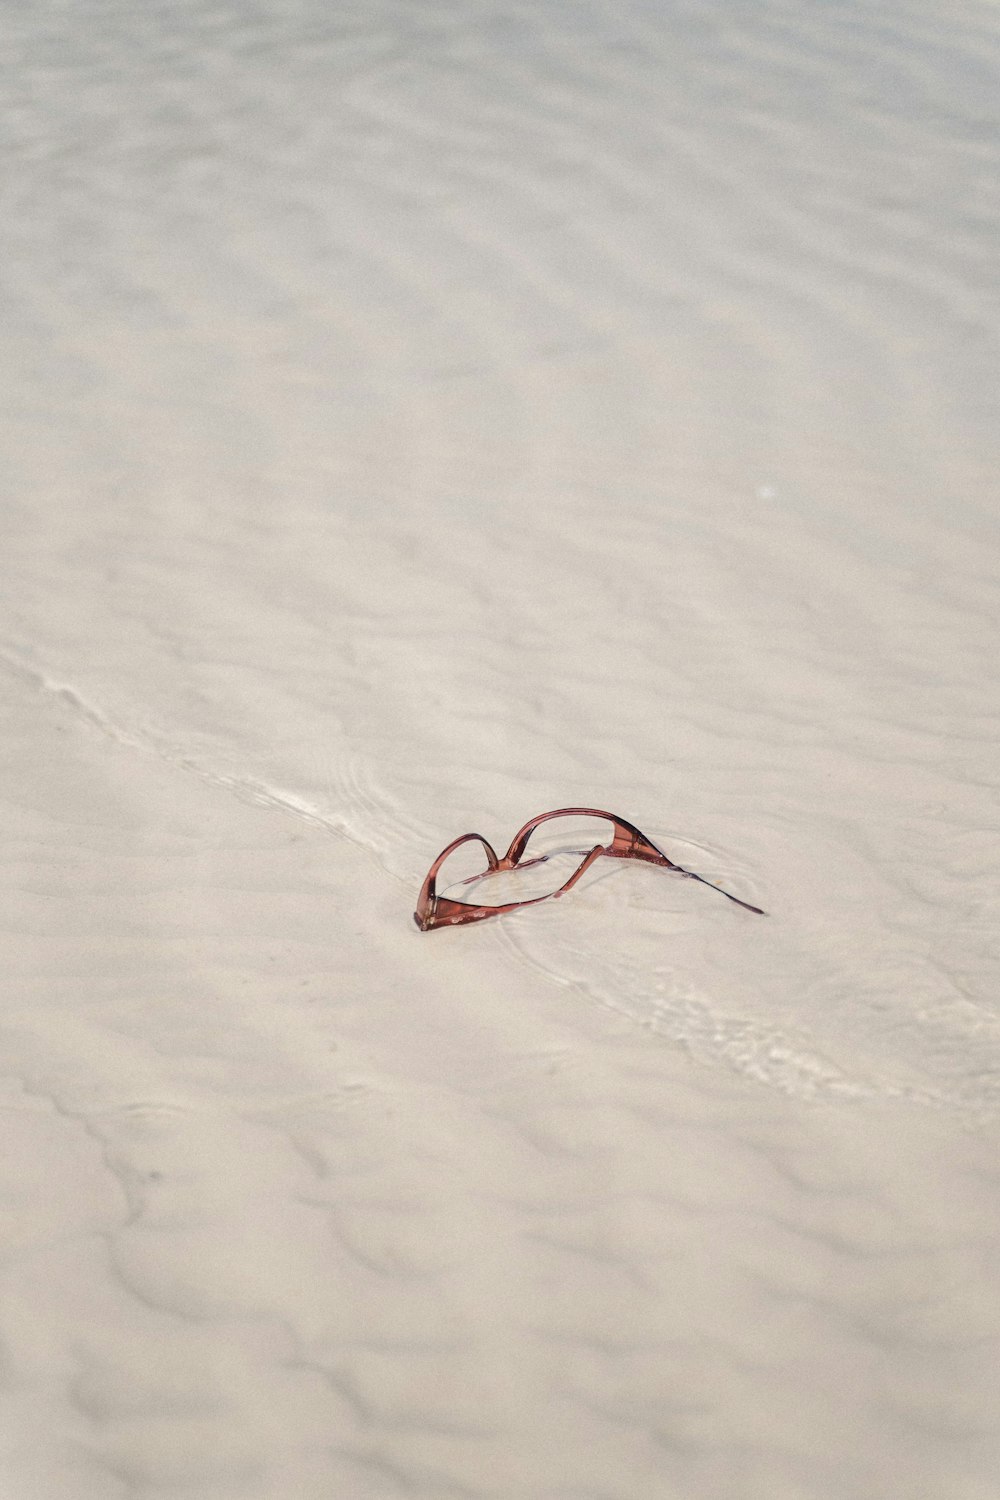 red and black rope on white sand